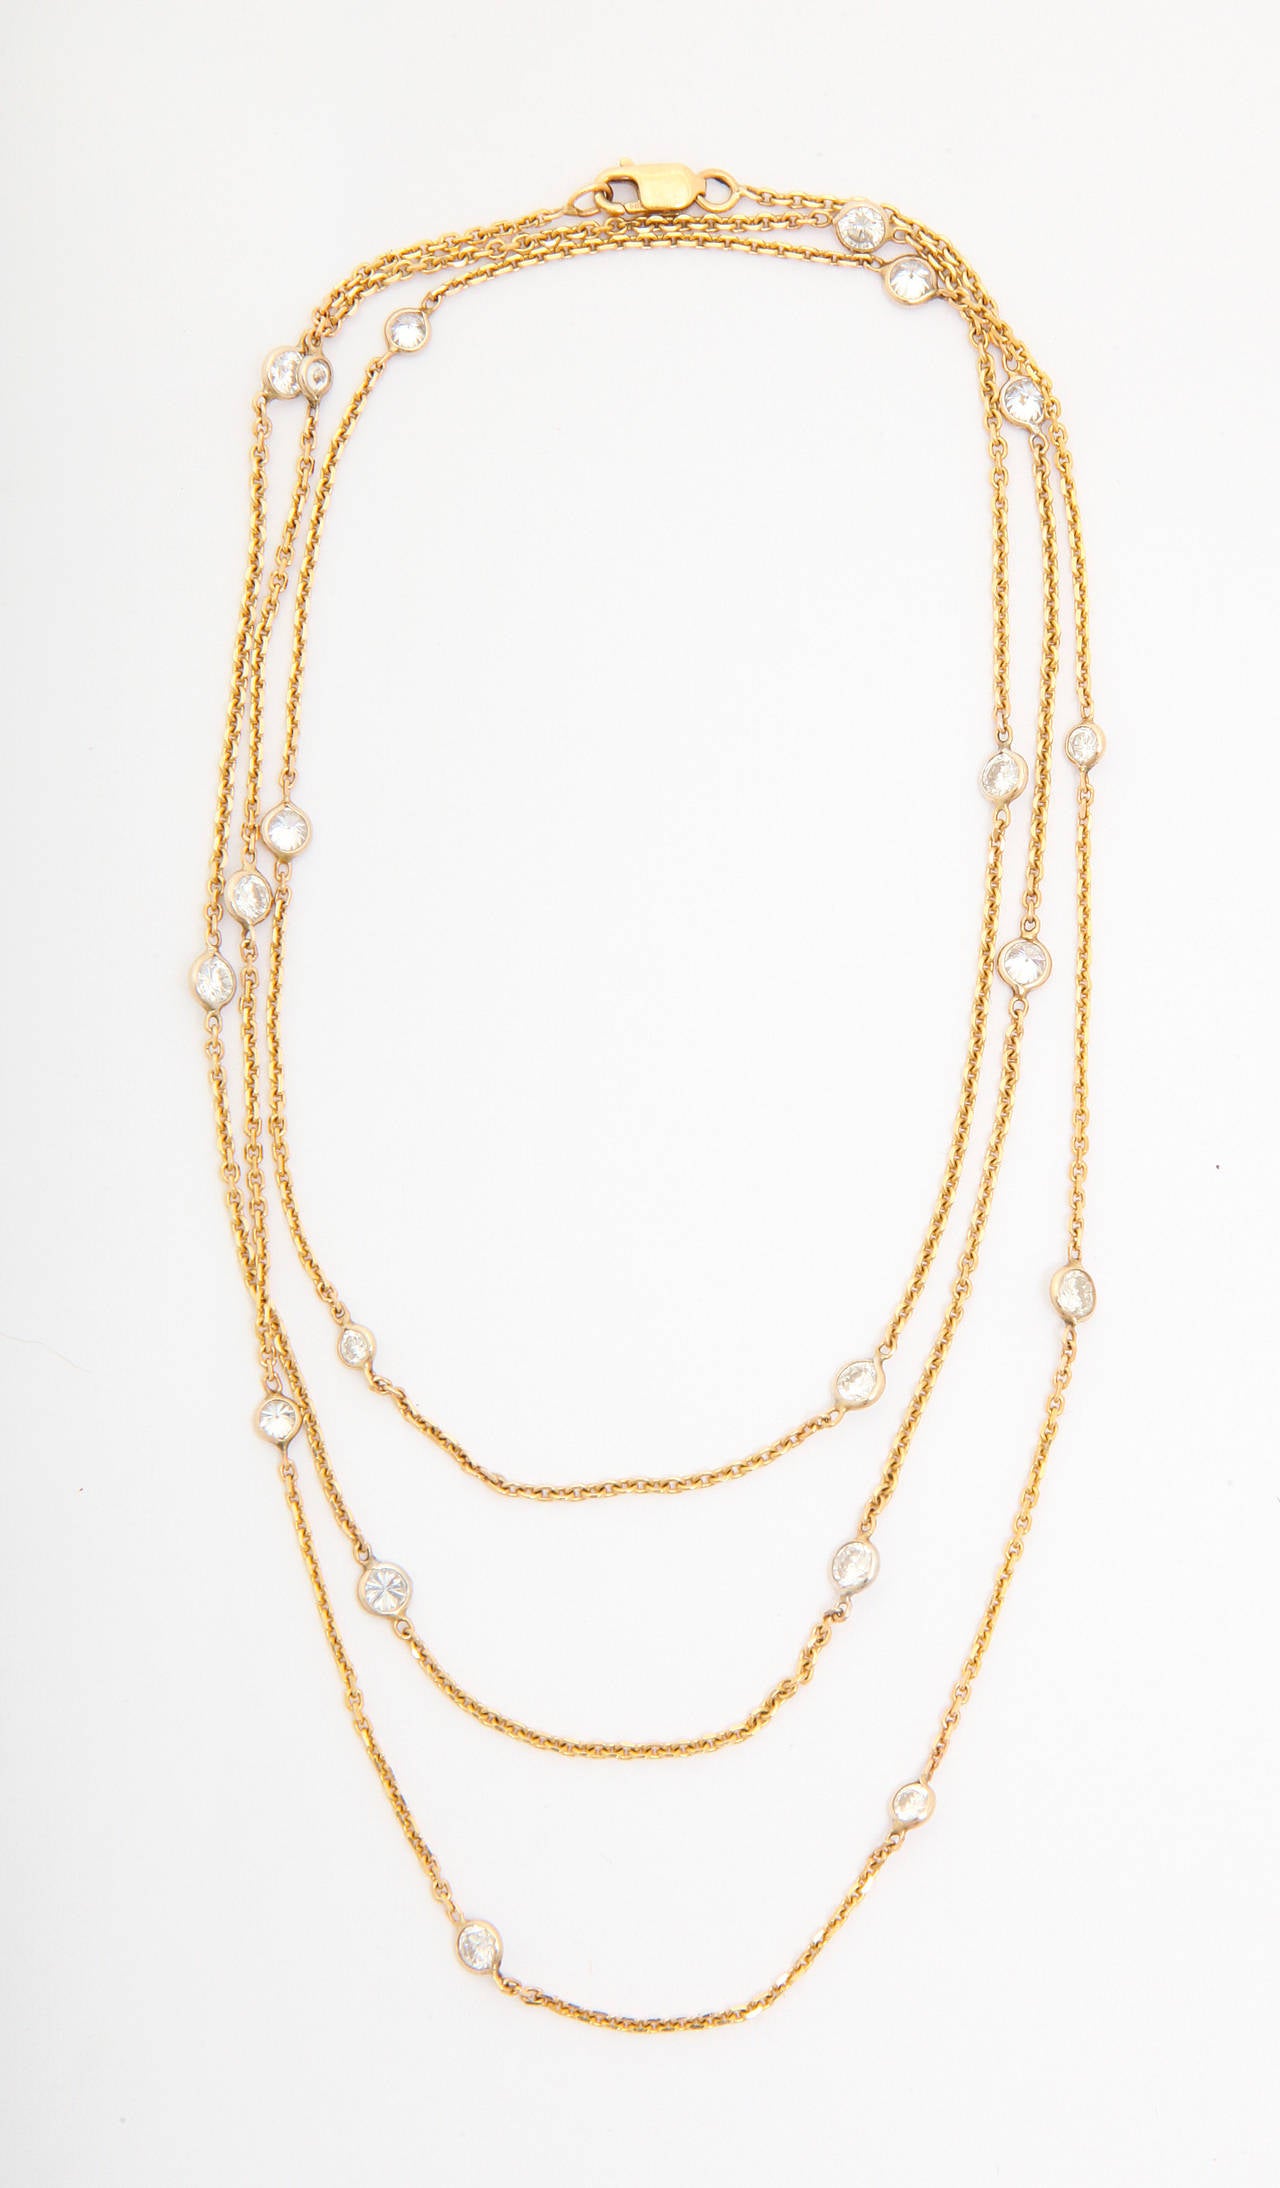 Diamonds by the yard long chain necklace in yellow gold. TOtal weight of the diamonds is approx. 2.5 cts. Of particular interest is that the stones are in various sizes, from 5 to 20 points each. Each stone is hand wrapped by the jeweler in a bezel